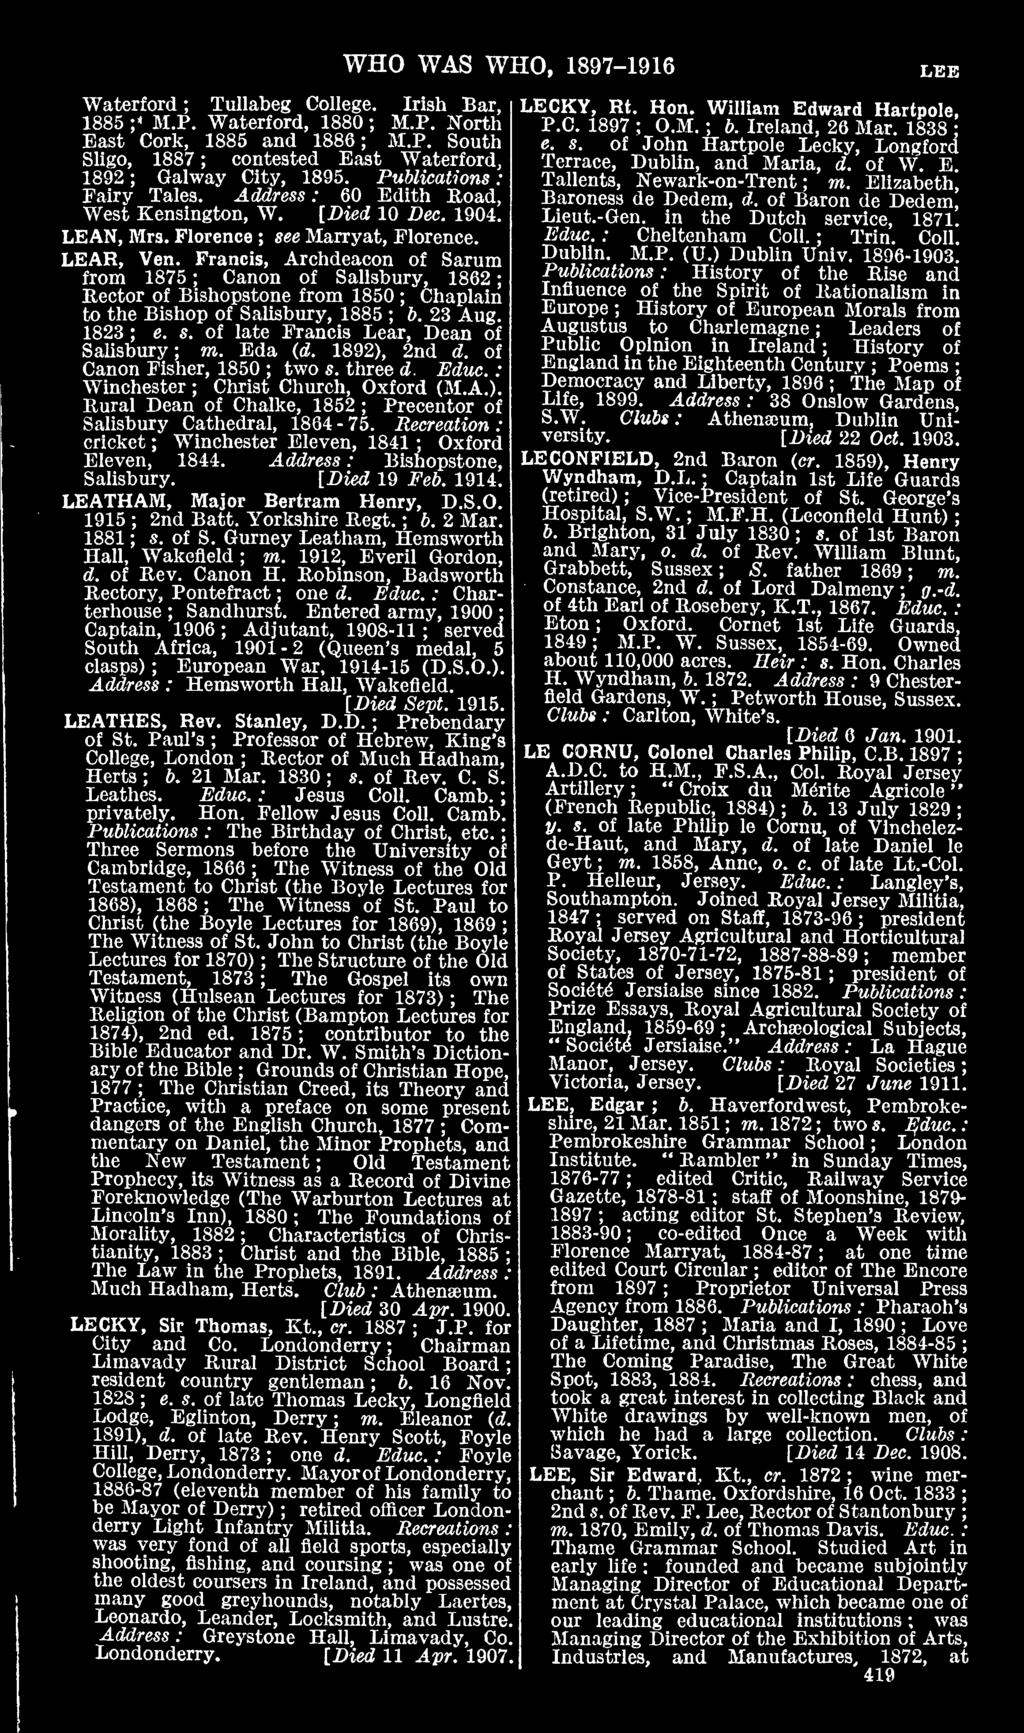 WHO WAS WHO, 1897-1916 LEE Waterford Tullabeg College. Irish Bar, 1885 M.P. Waterford. 1880 M.P. North East Cork, 1885 and 1886 M.P. South Sligo, 1887 contested East Waterford, 1892 Galway City, 1895.